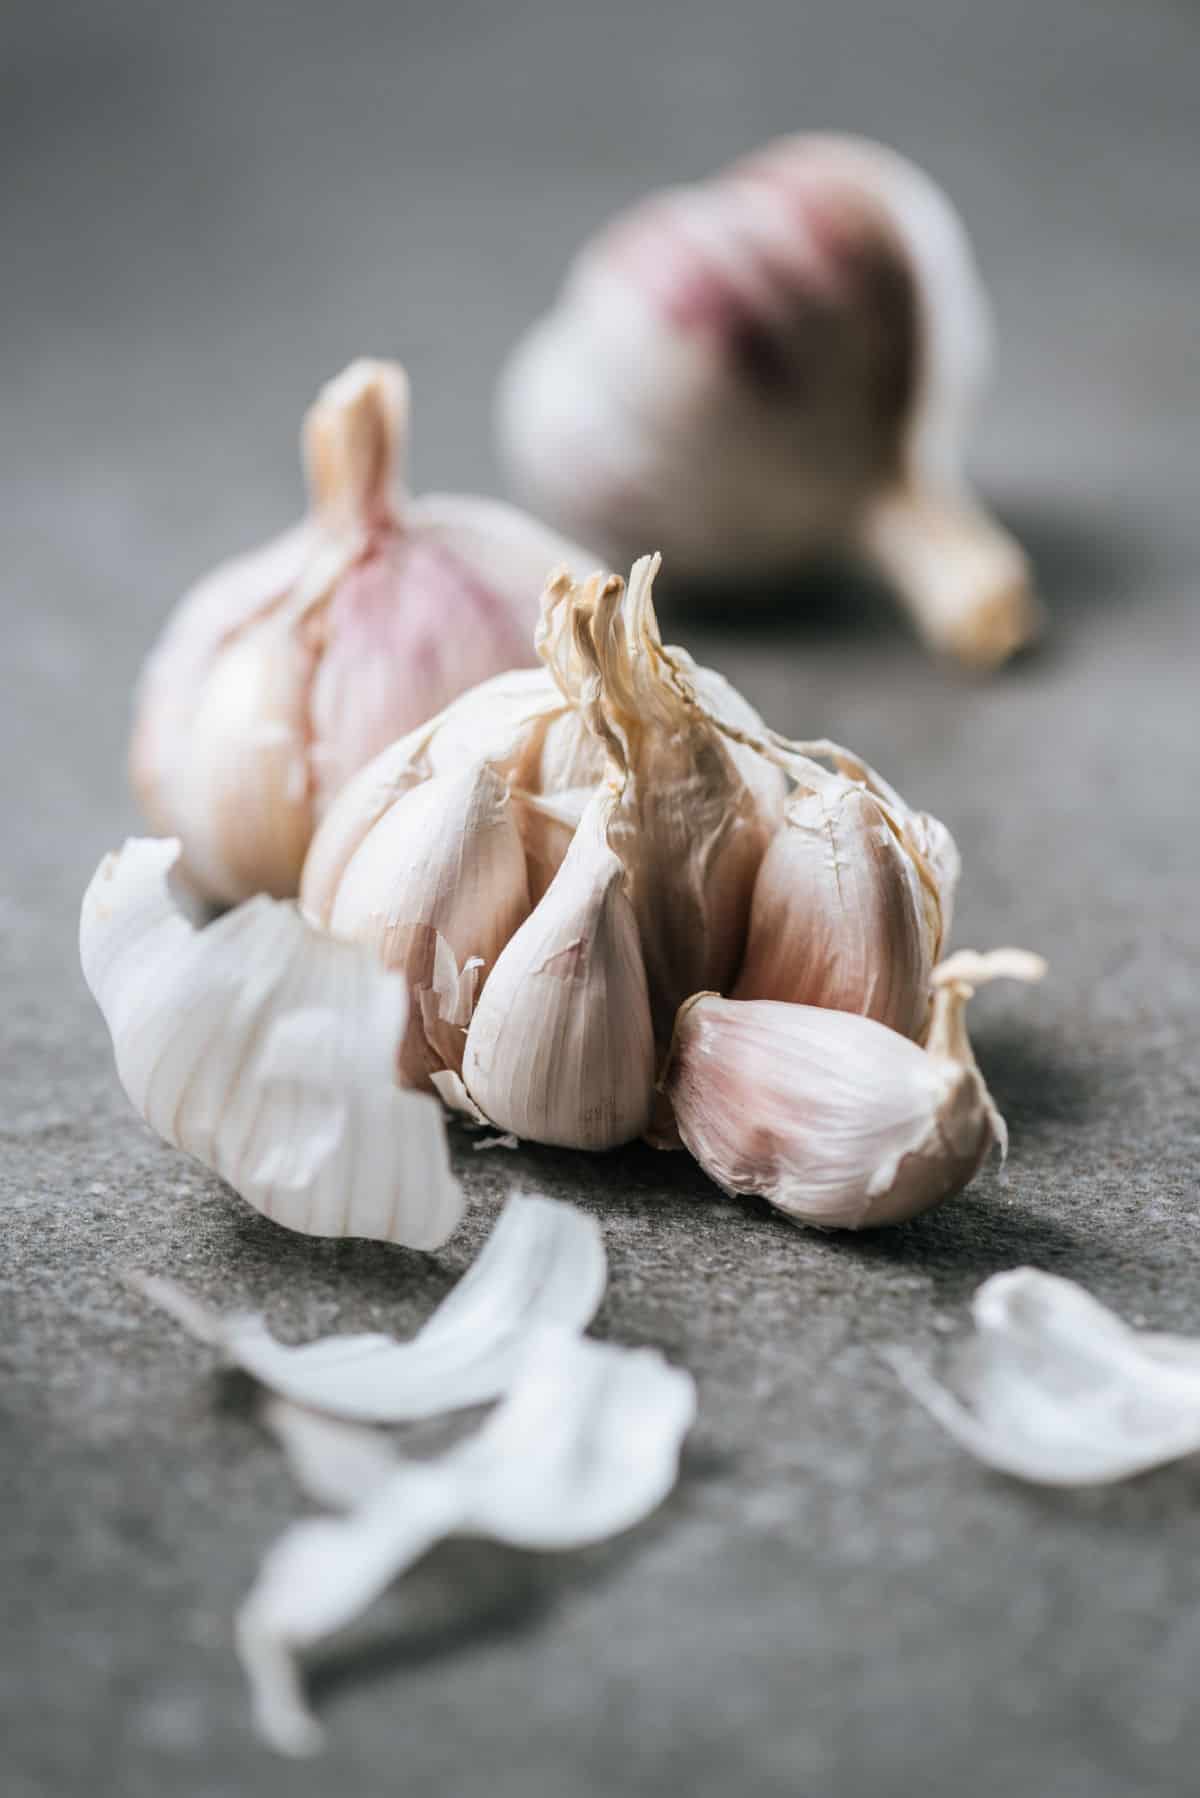 A bulb of garlic with some cloves pulled out.